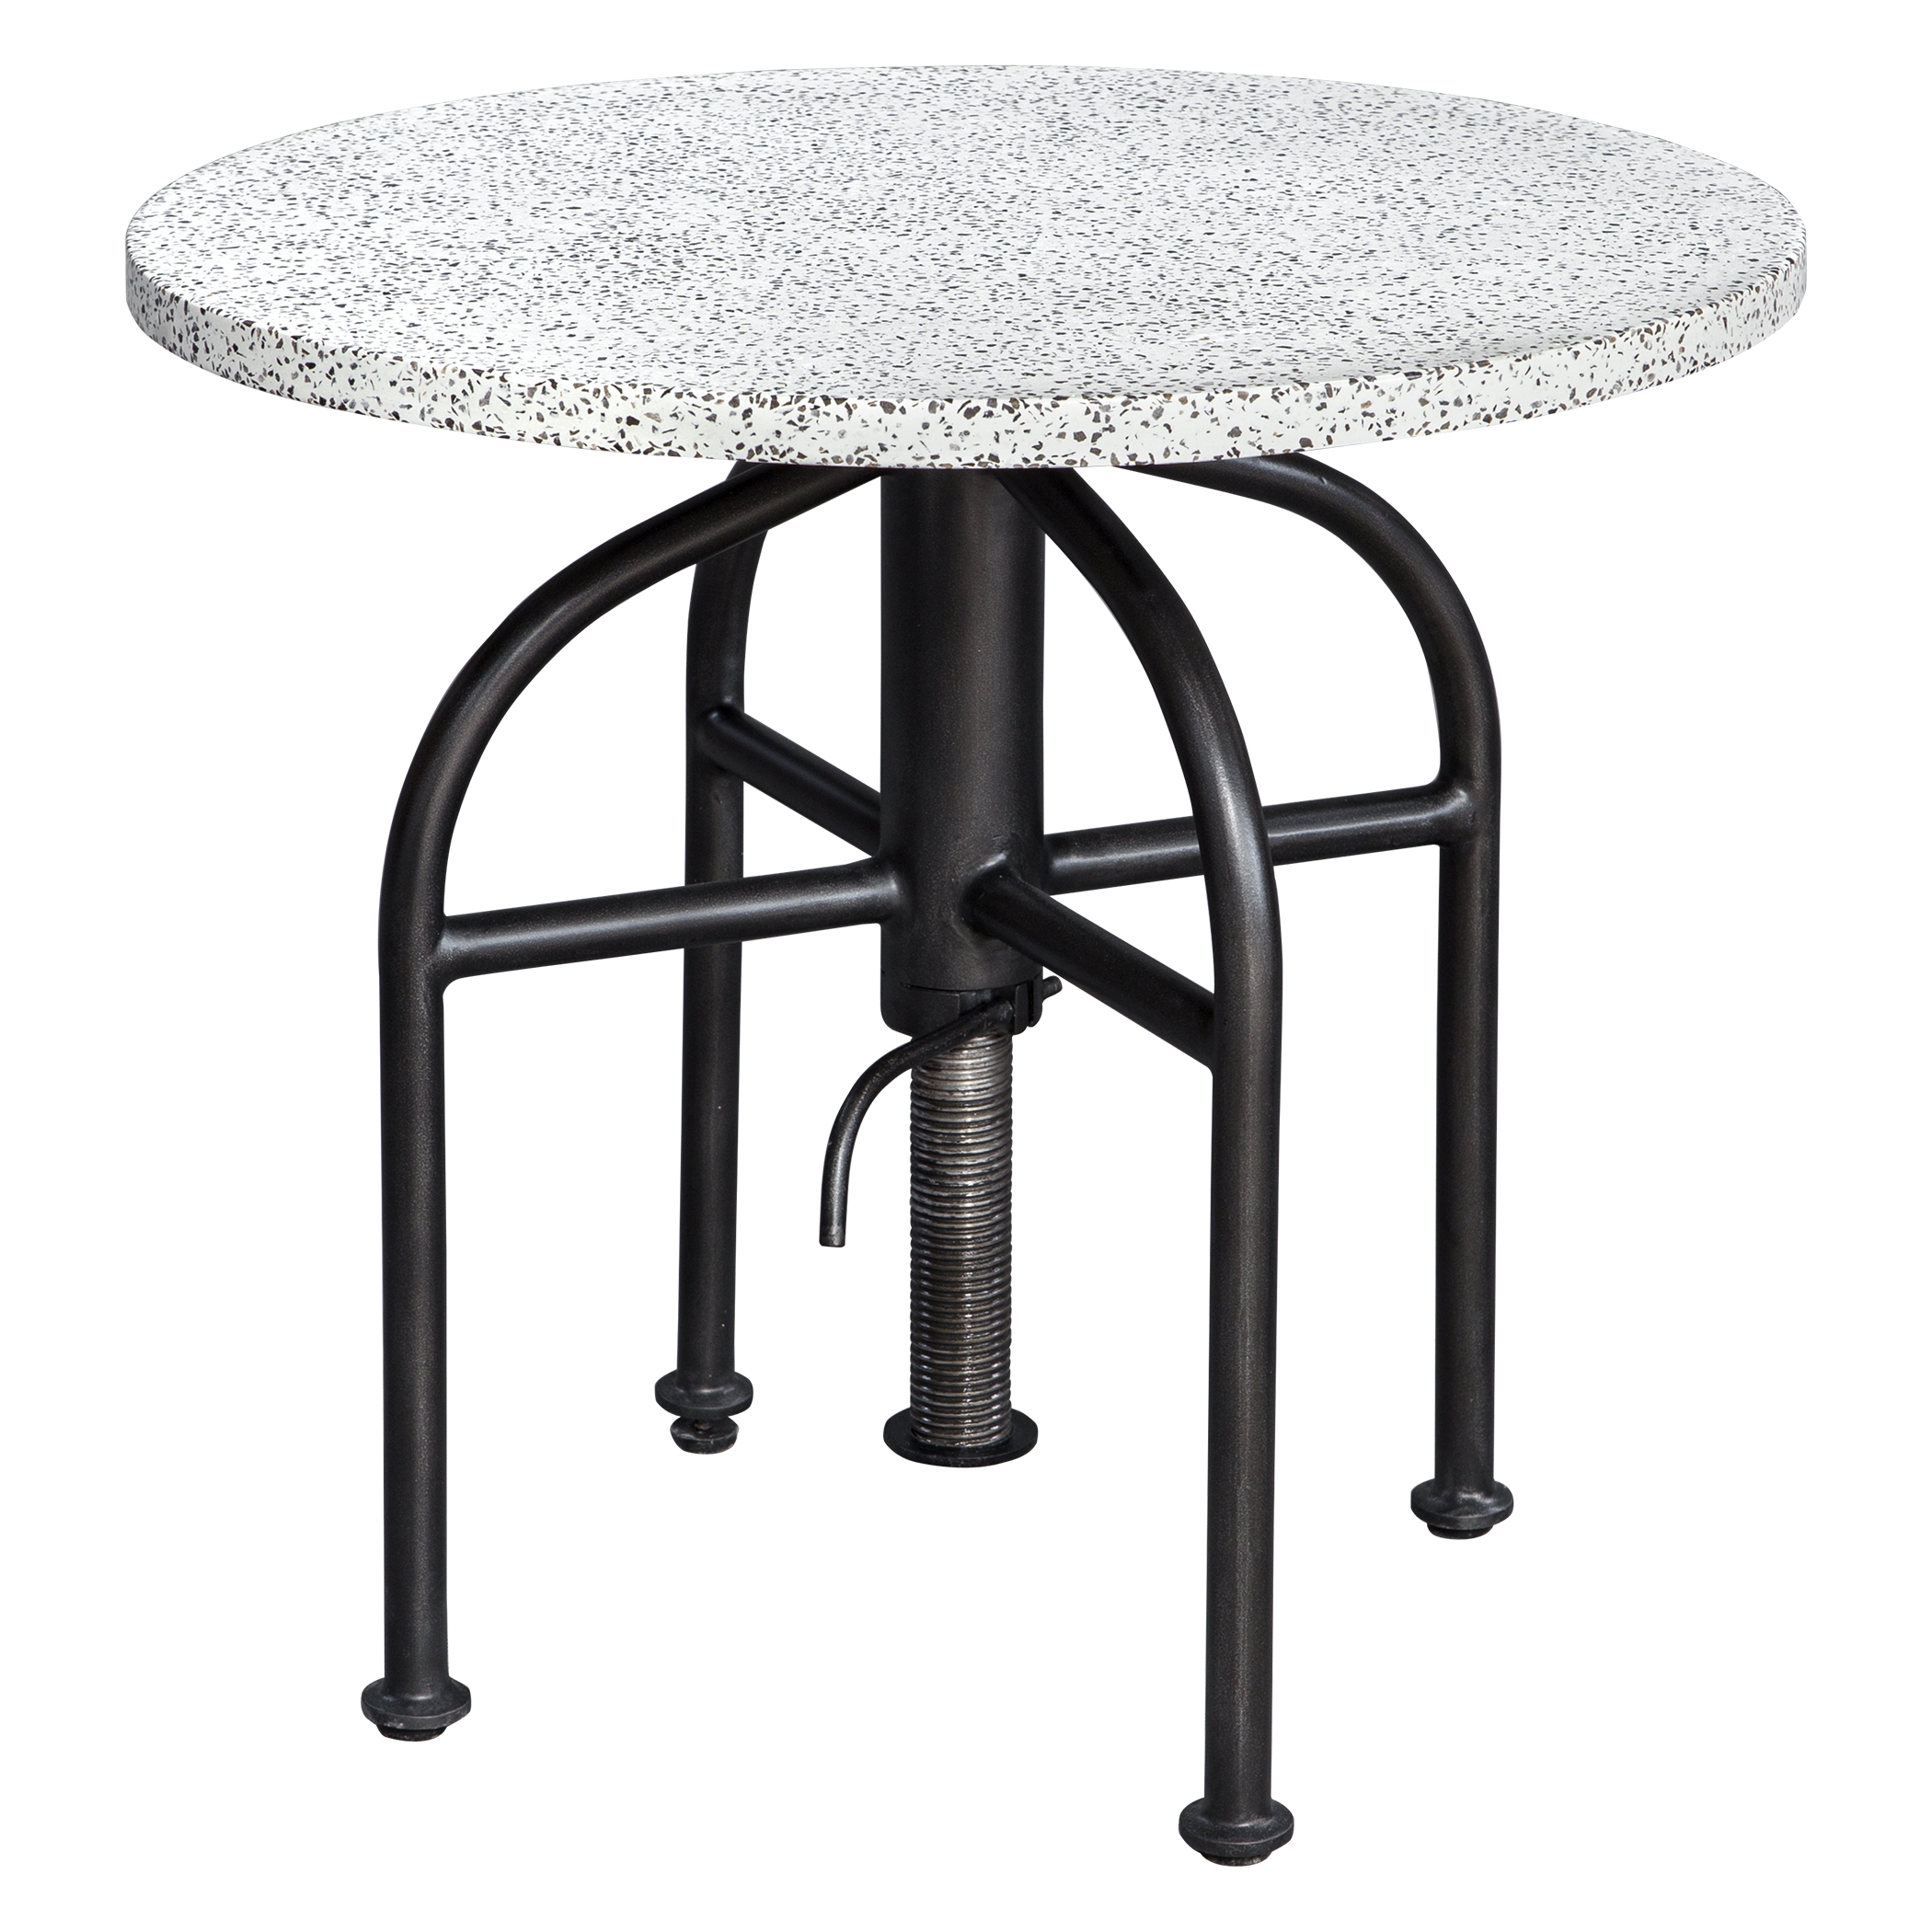 Apsel Industrial Accent Table - Image 4